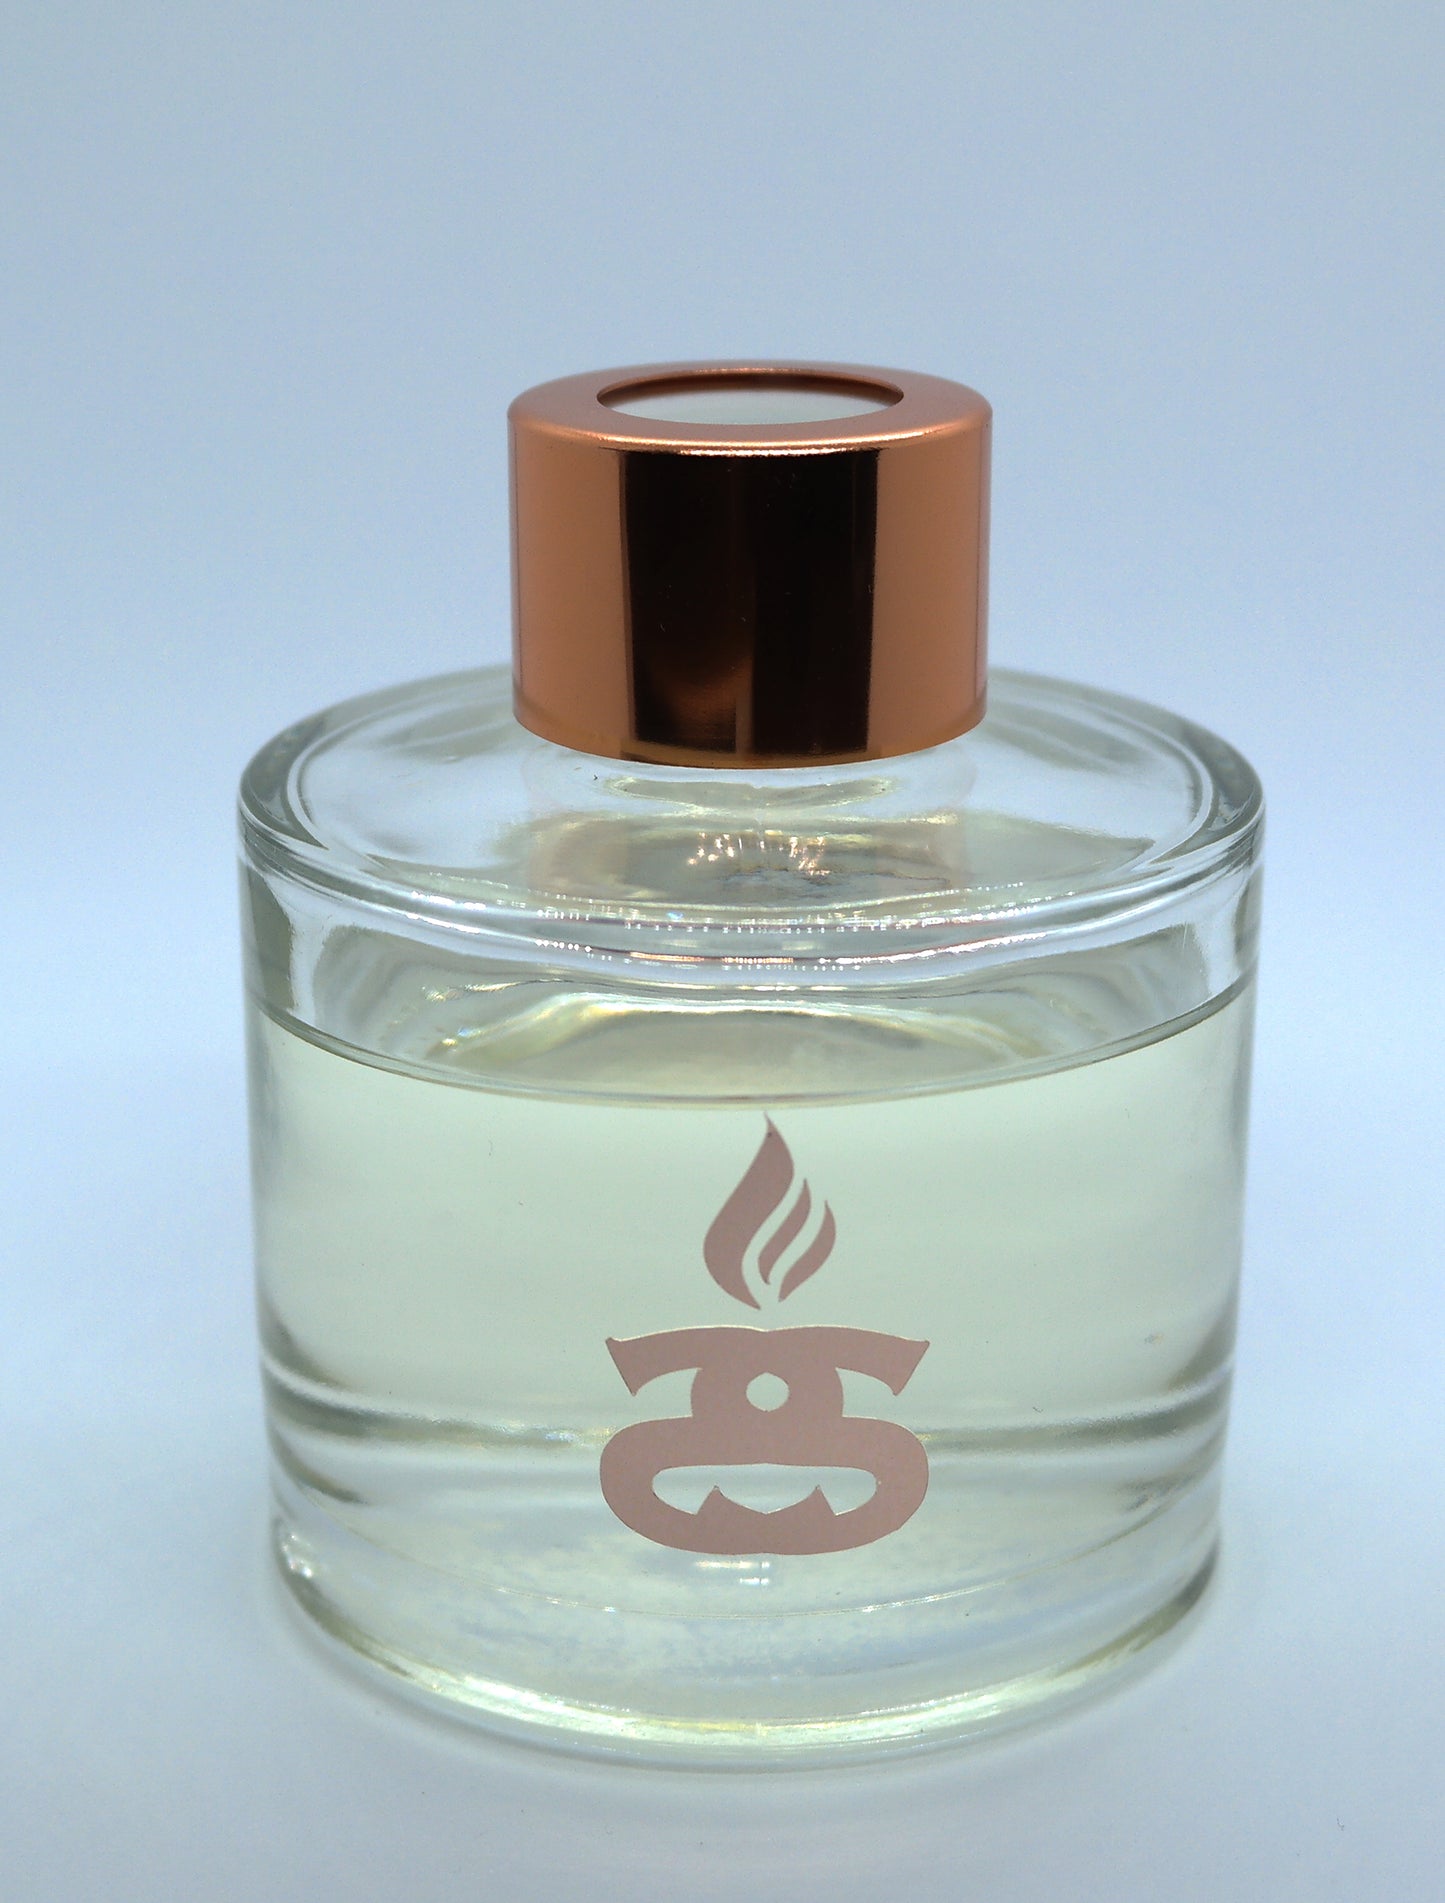 Simple Scents Excellence Reed Diffuser in 100ml glass squat bottle with rose gold cap lid